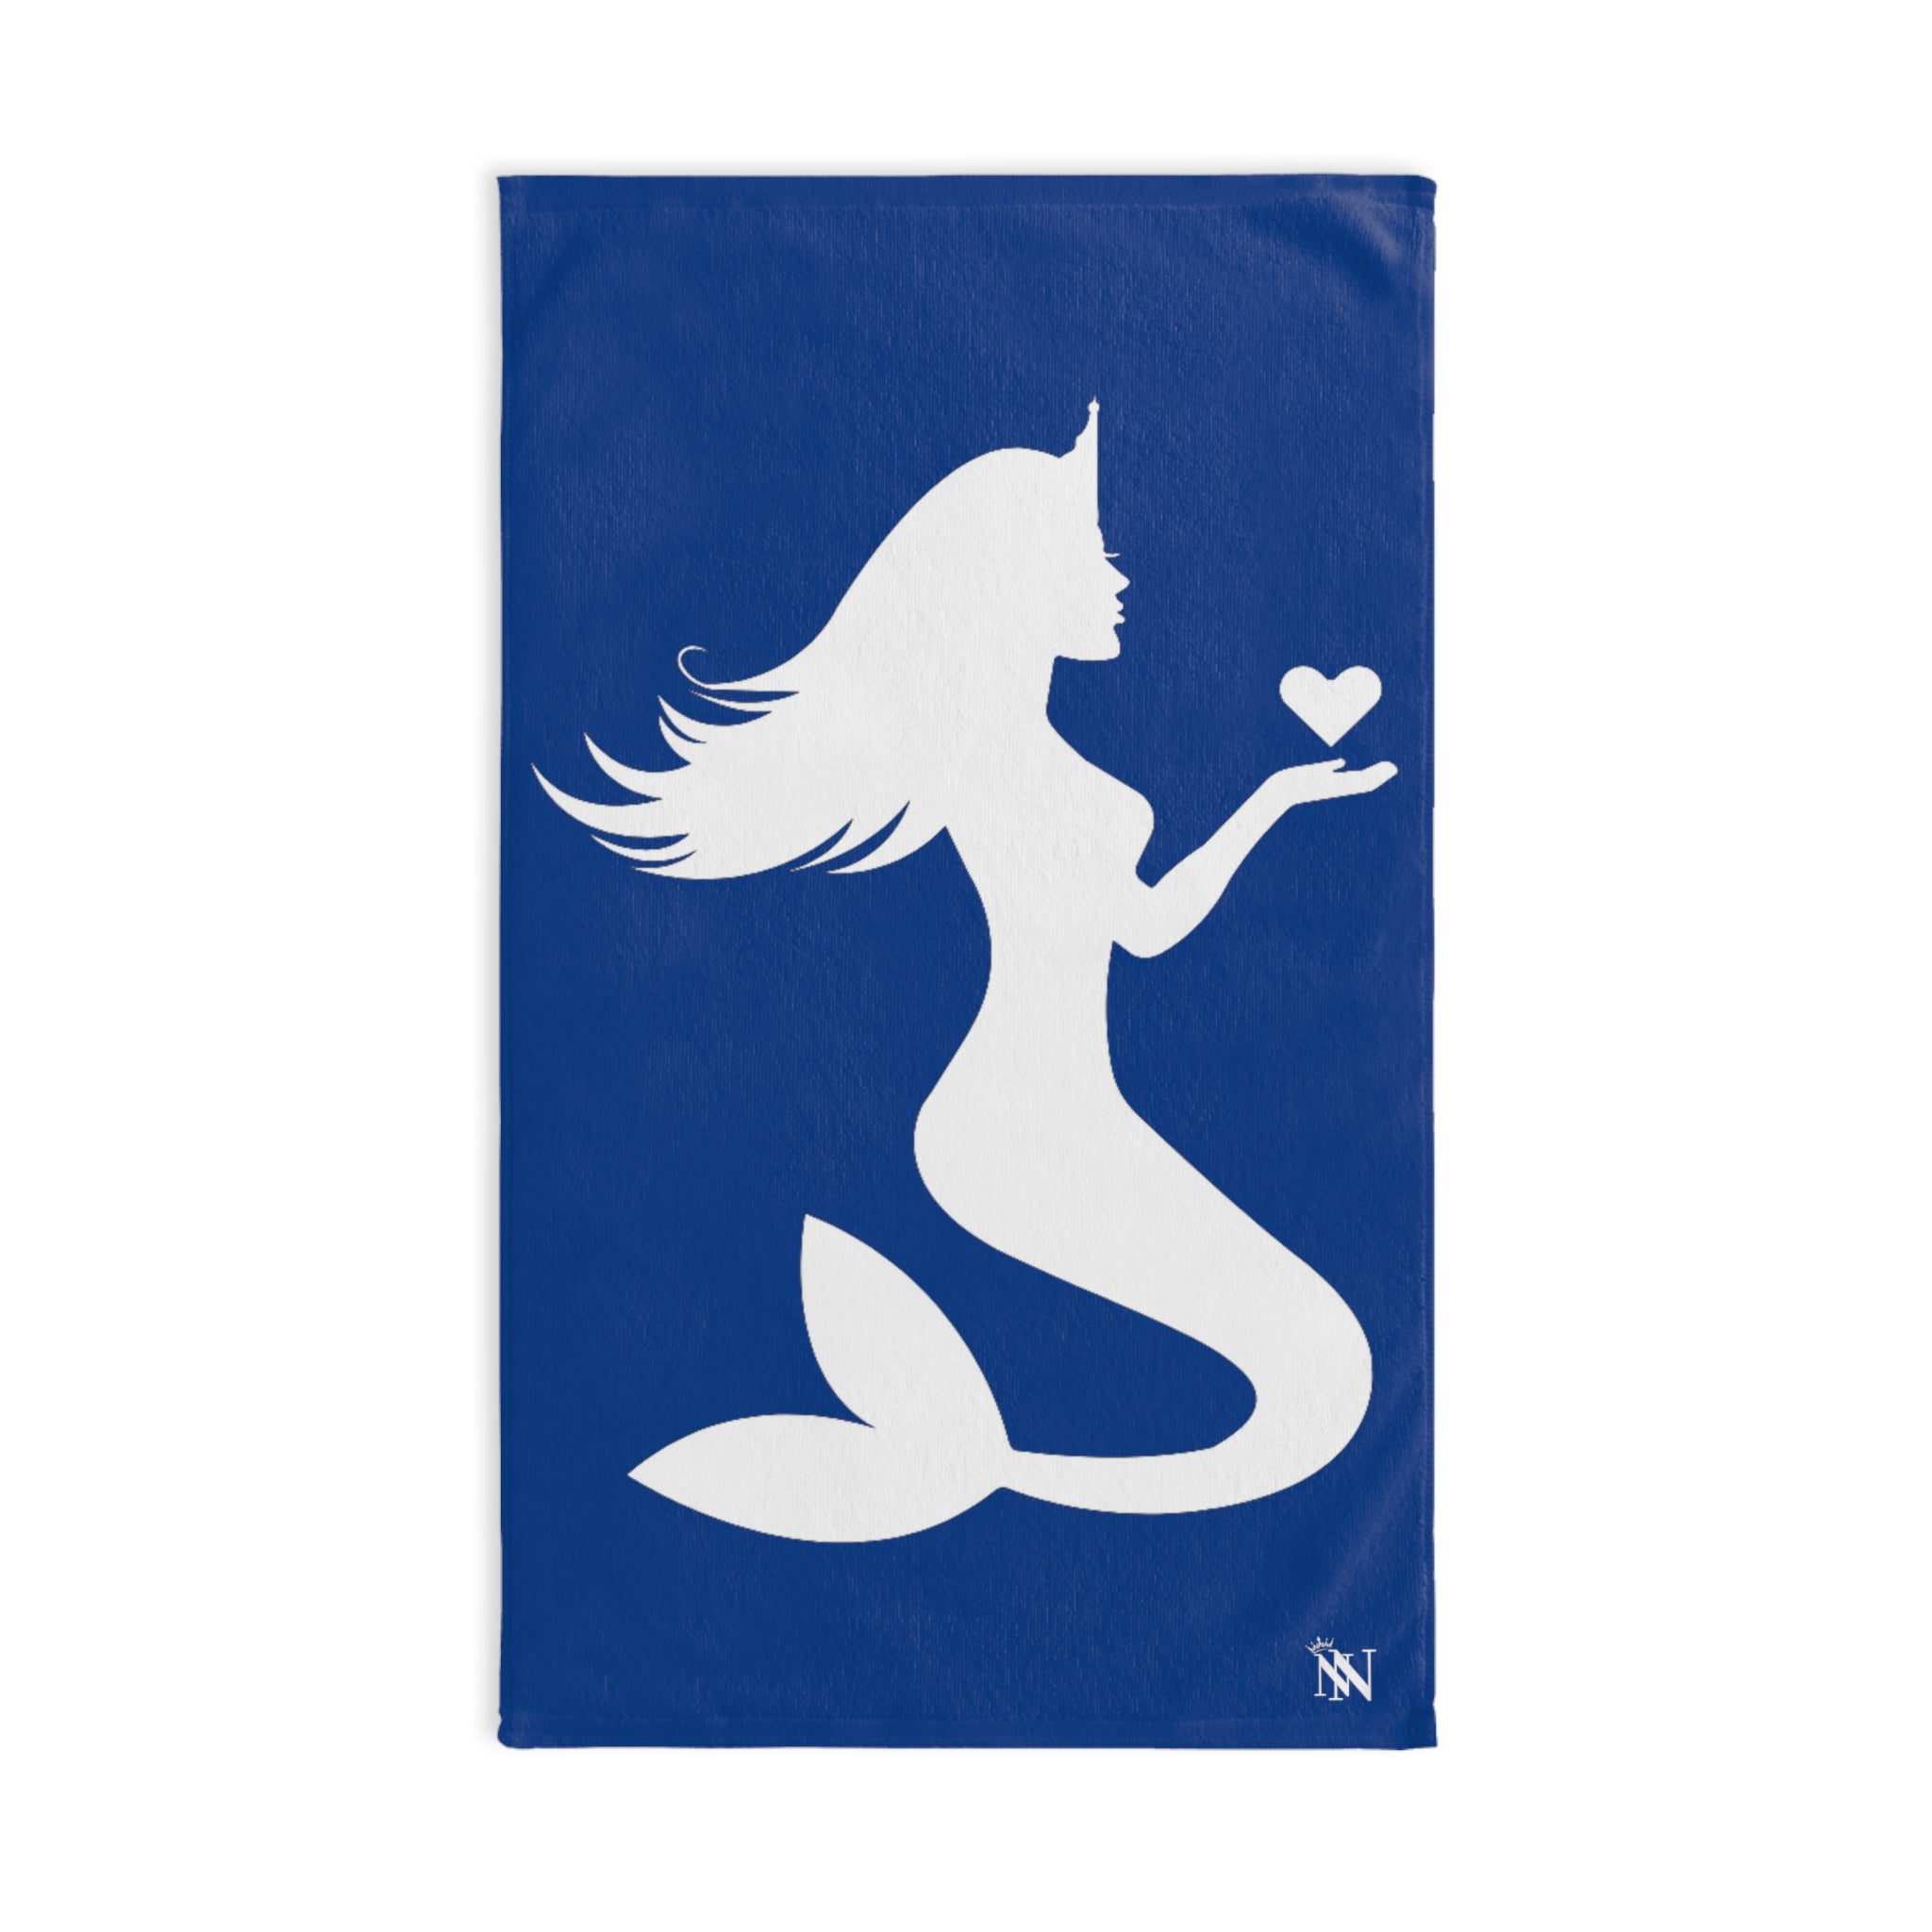 Pray Mermaid HeartBlue | Gifts for Boyfriend, Funny Towel Romantic Gift for Wedding Couple Fiance First Year Anniversary Valentines, Party Gag Gifts, Joke Humor Cloth for Husband Men BF NECTAR NAPKINS